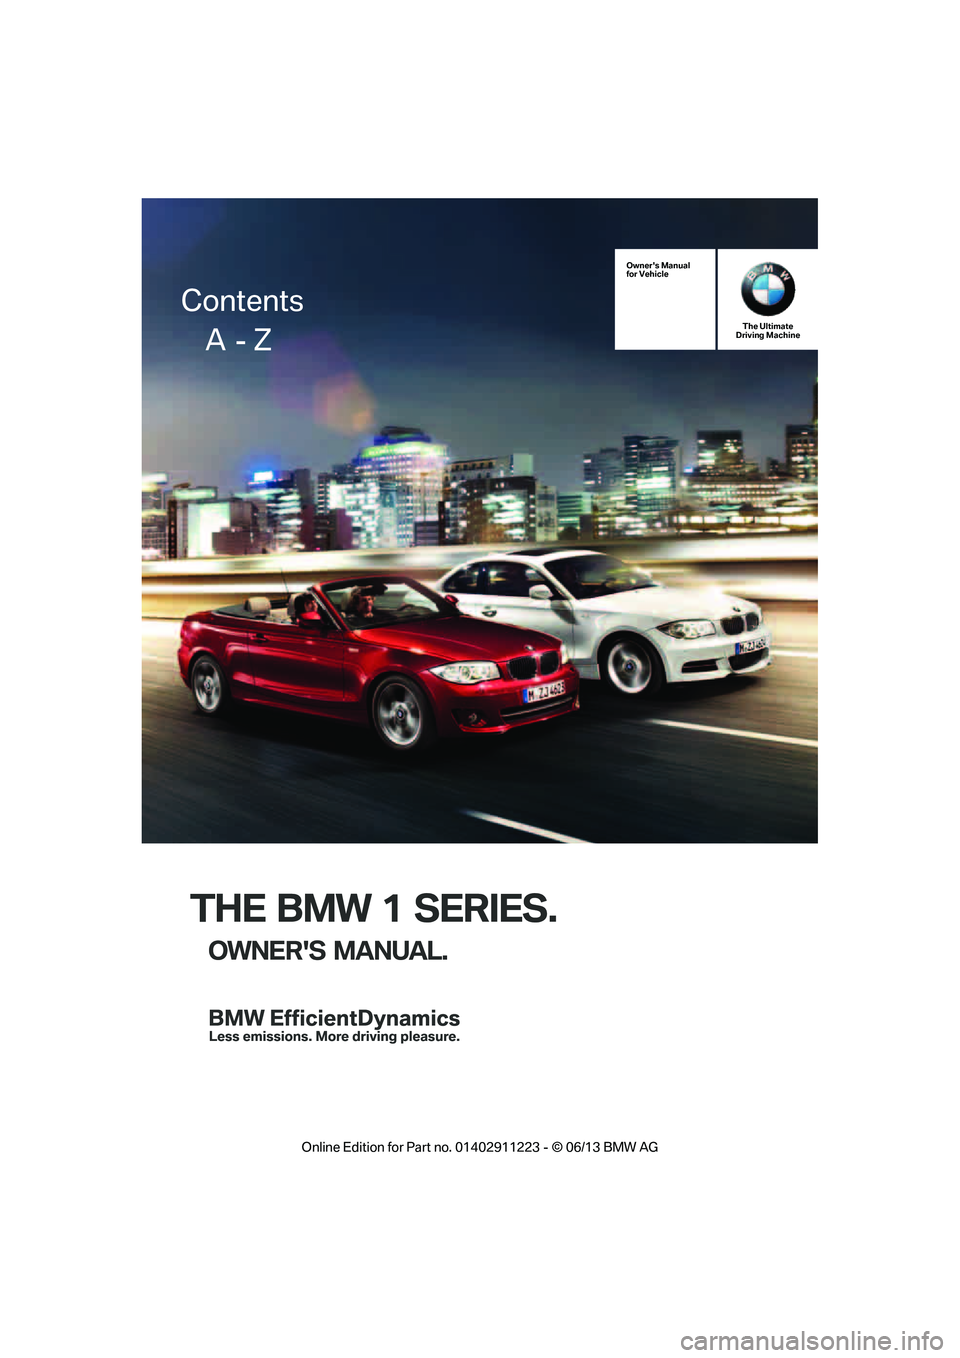 BMW 135IS COUPE 2013  Owners Manual THE BMW 1 SERIES.
OWNERS MANUAL.
Owners Manual
for VehicleThe Ultimate
Driving Machine
Contents
     A  - Z

�2�Q�O�L�Q�H �(�G�L�W�L�R�Q �I�R�U �3�D�U�W �Q�R� ����������� � �